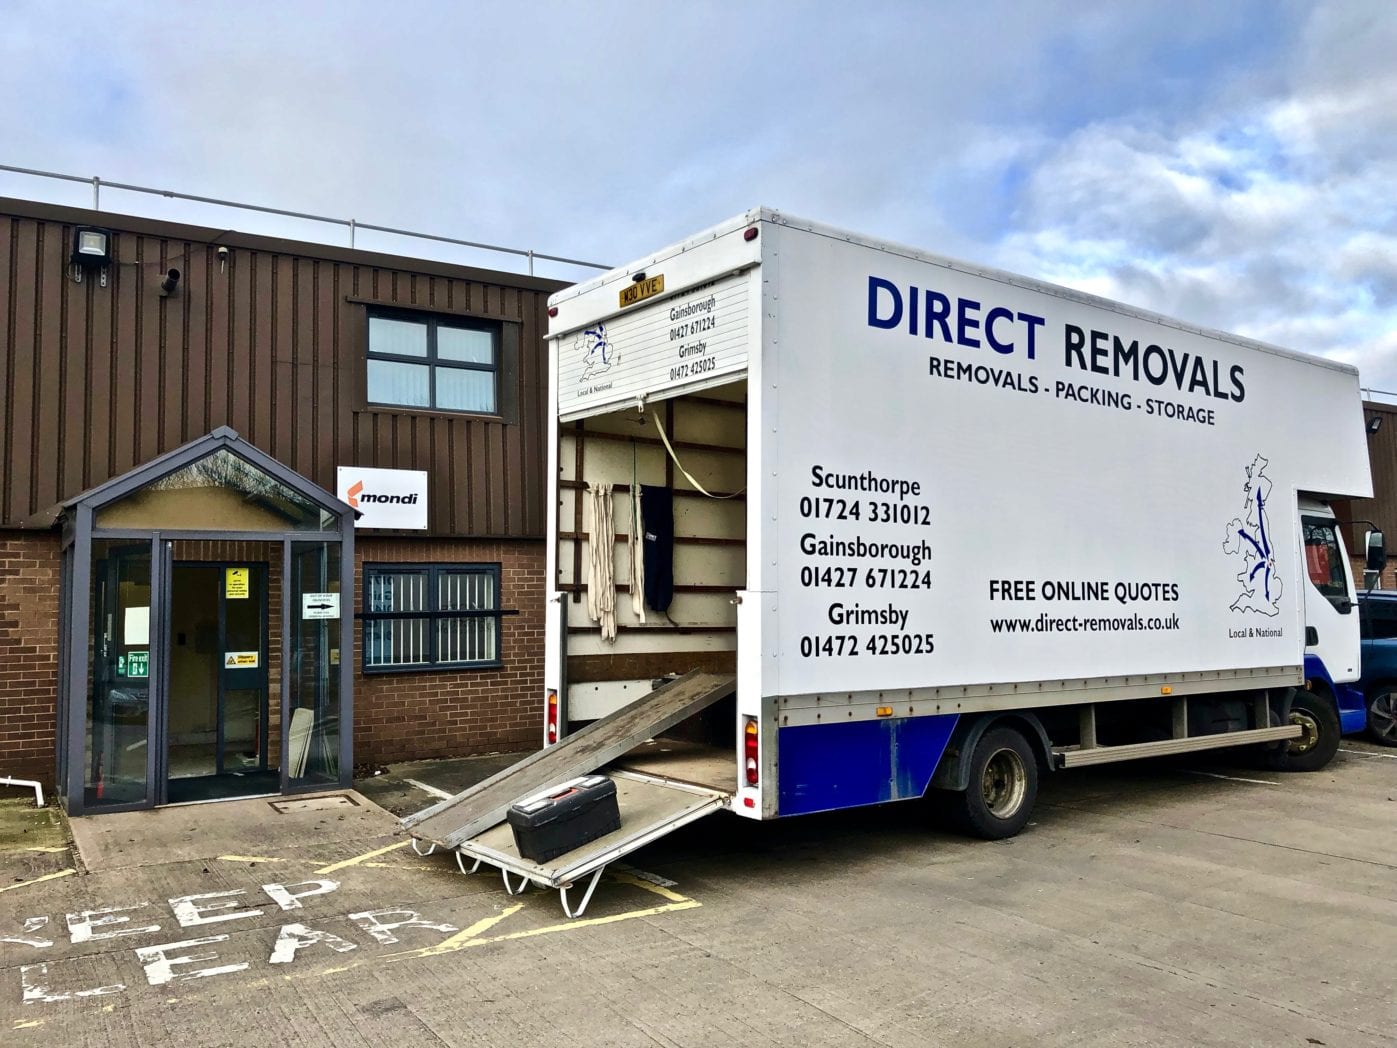 Scunthorpe office removal service